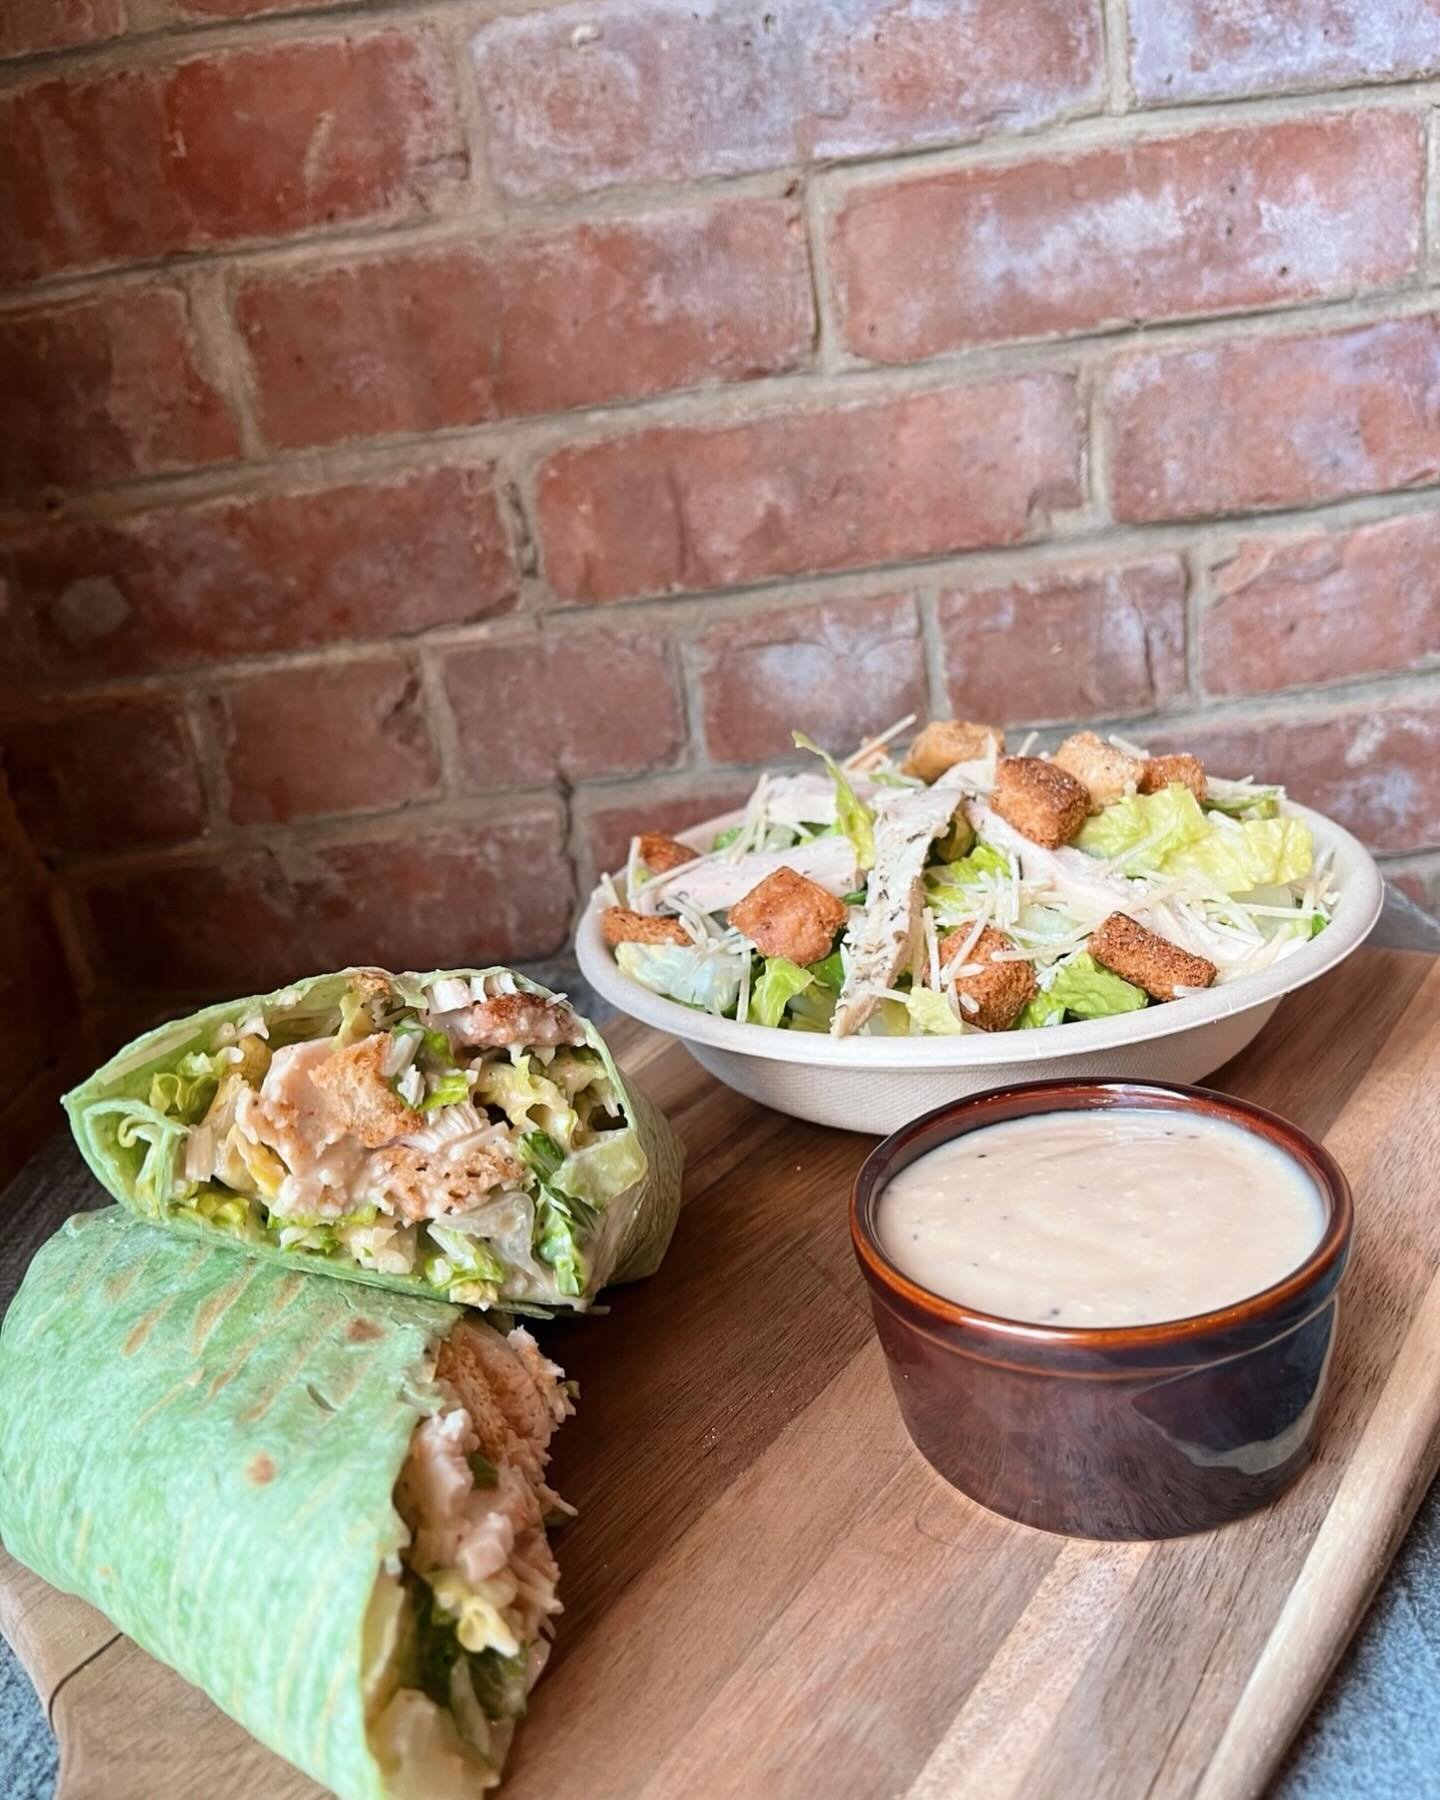 It&rsquo;s never to early to be thinking about lunch ‼️ Try our Caesar Salad or Chicken Caesar Salad Wrap. Available at both our locations too. Happy Tuesday 🌞☕️ #foodies #lunchideas #salads #wraps #paninis #flatbreads #tuesdayvibes #patioweather